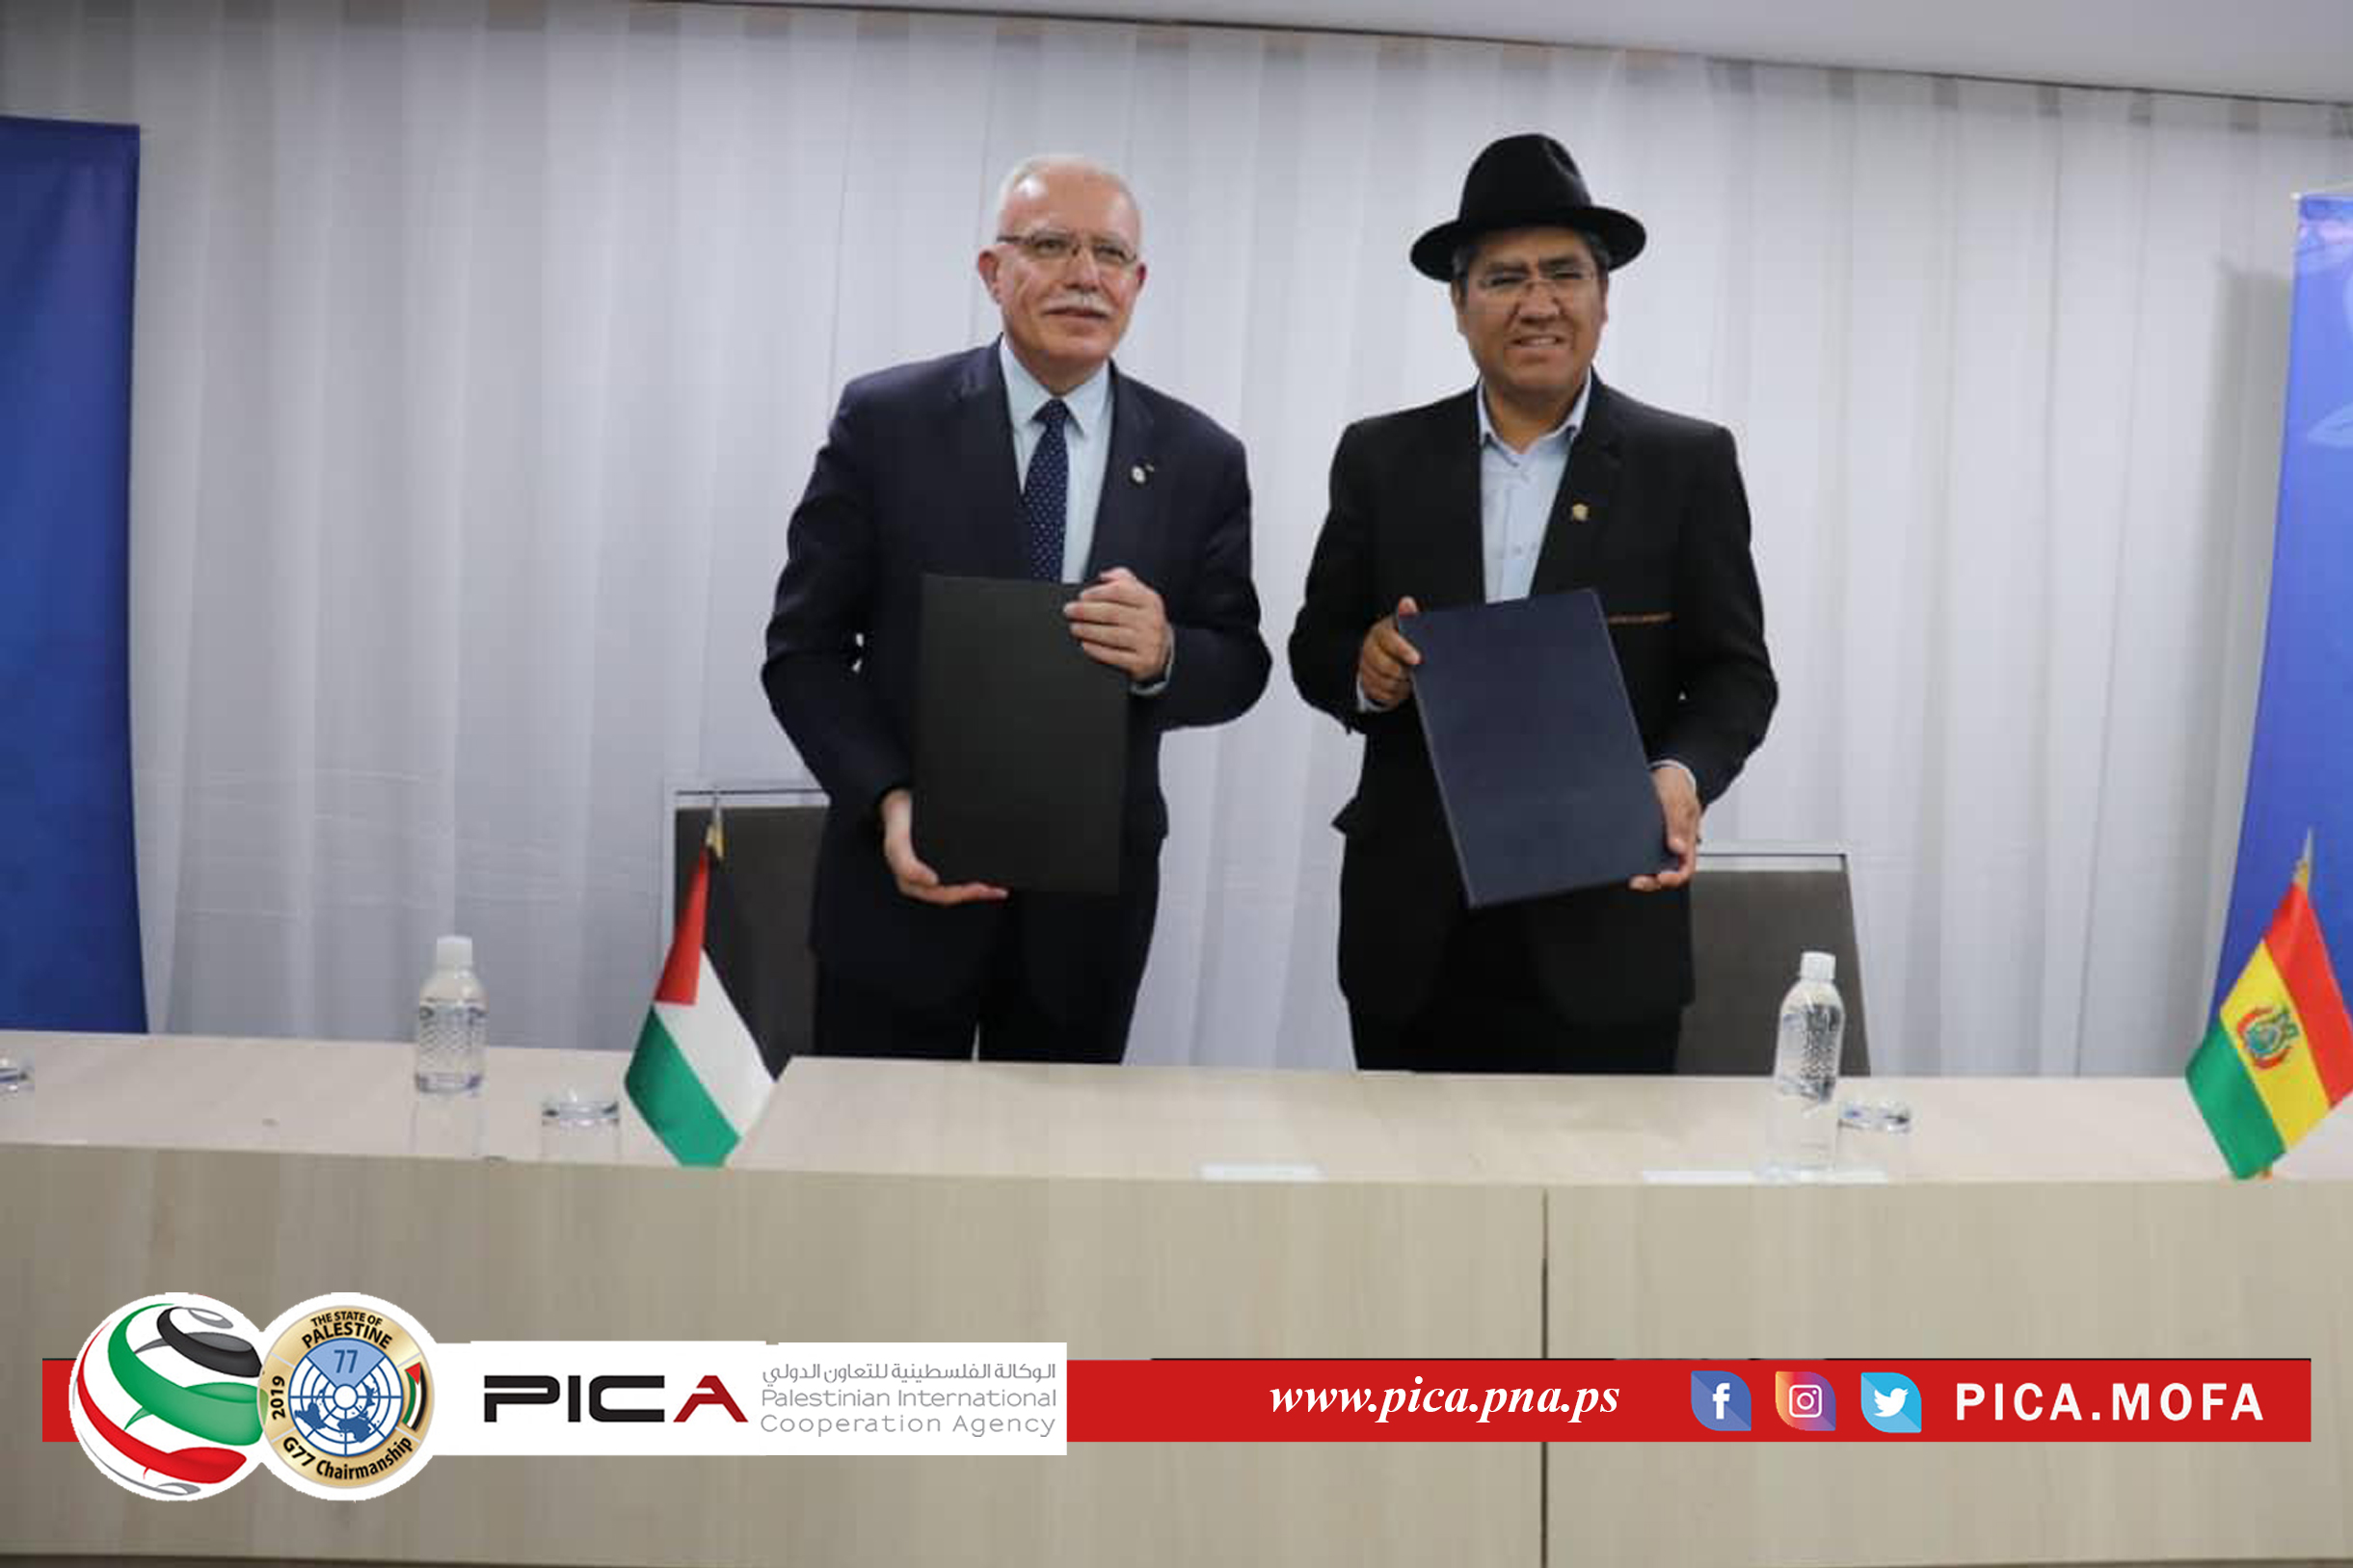 Cooperation Agreement between the State of Palestine and the Plurinational State of Bolivia